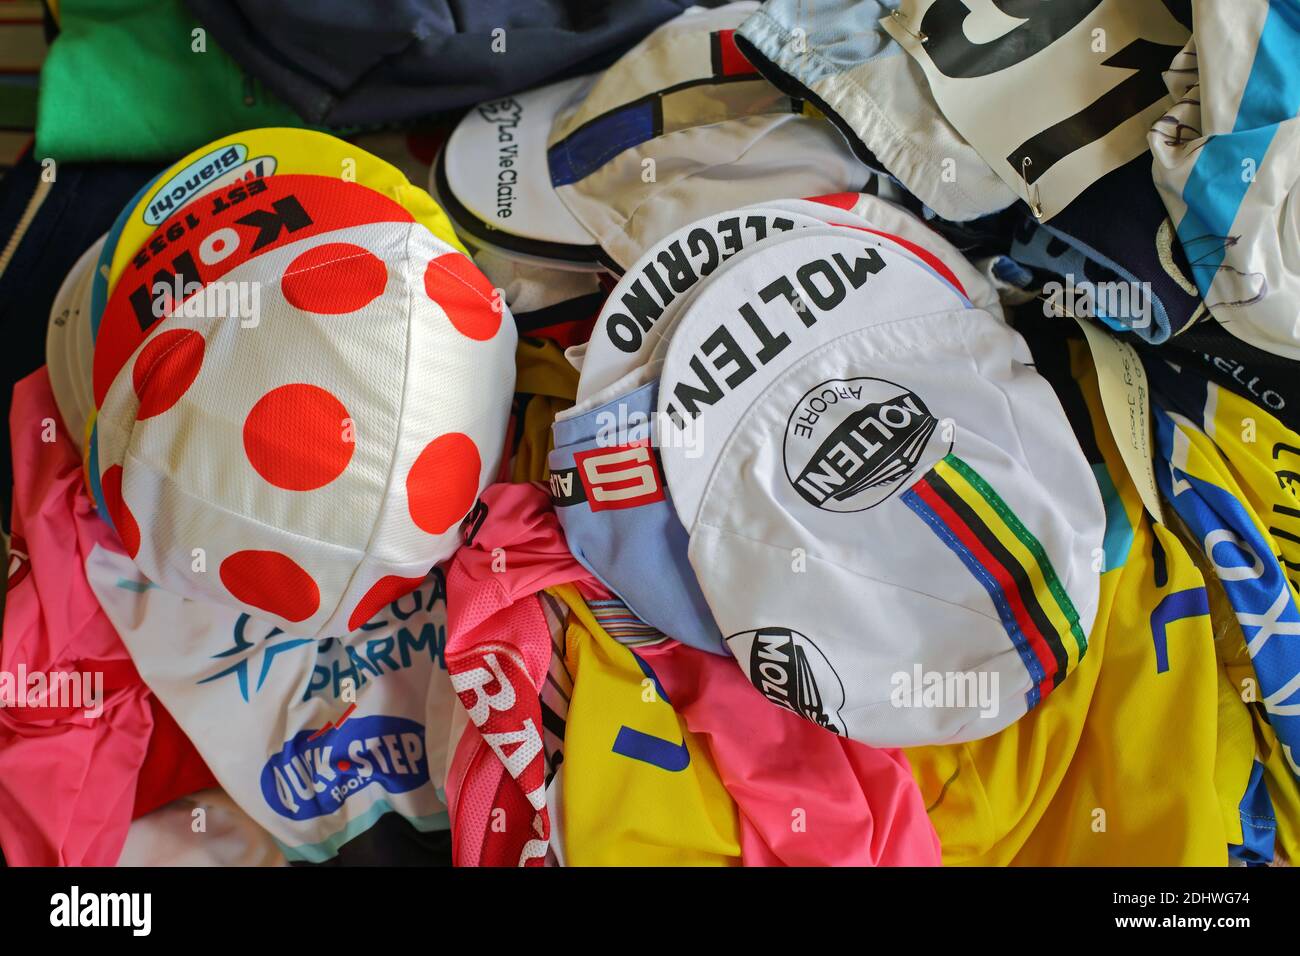 Paul Smith collection of cycling cycling jerseys and cap's Stock Photo